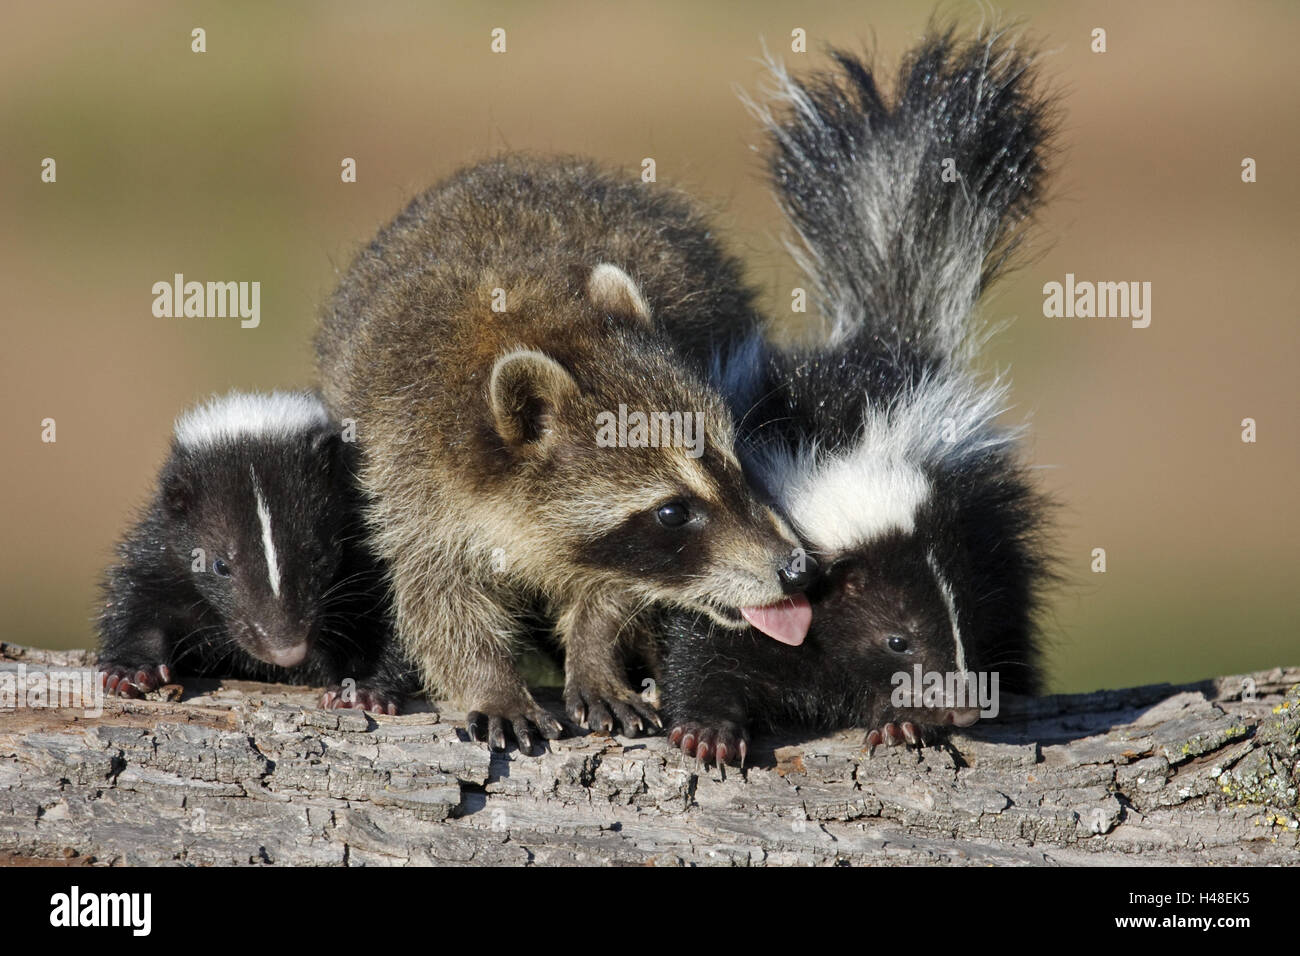 Racoon, Procyon lotor, skunks, Mephitis mephitis, young animals, trunk, Stock Photo